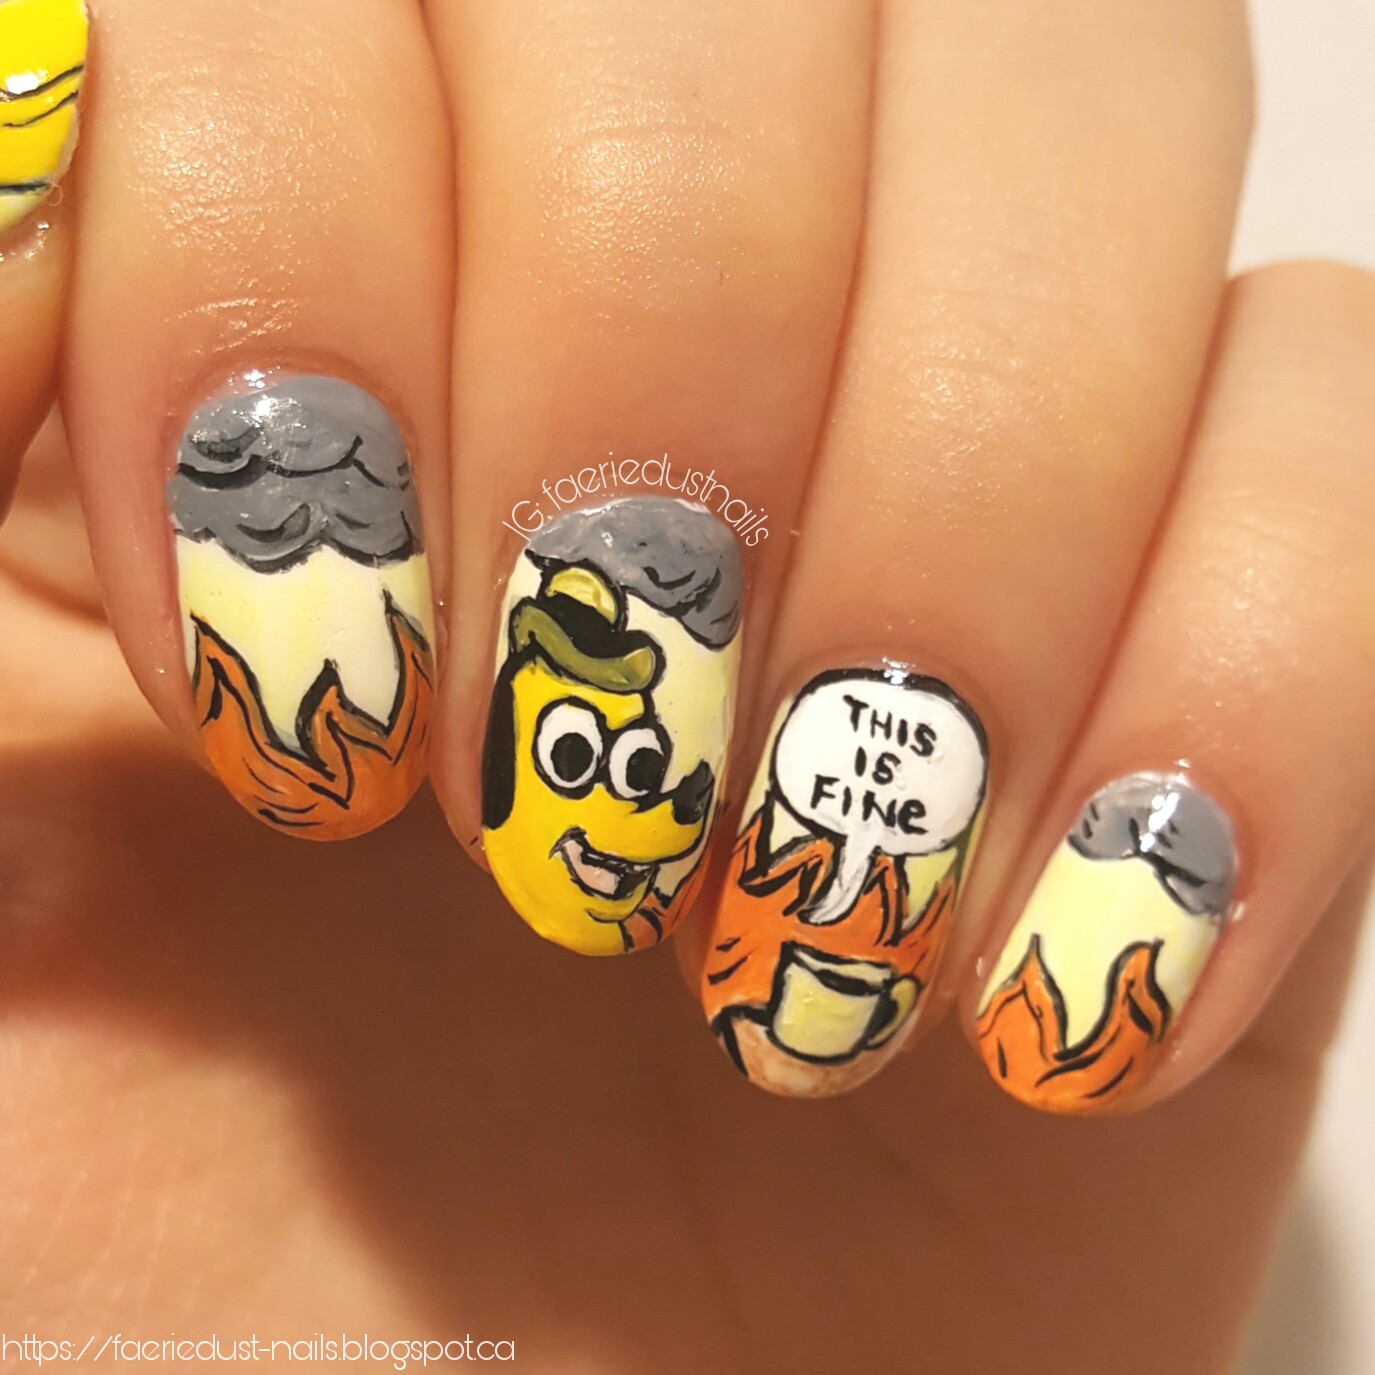 FaerieDust Nails: "This is fine." - Meme Inspired Nails (Quick NOTW Post)